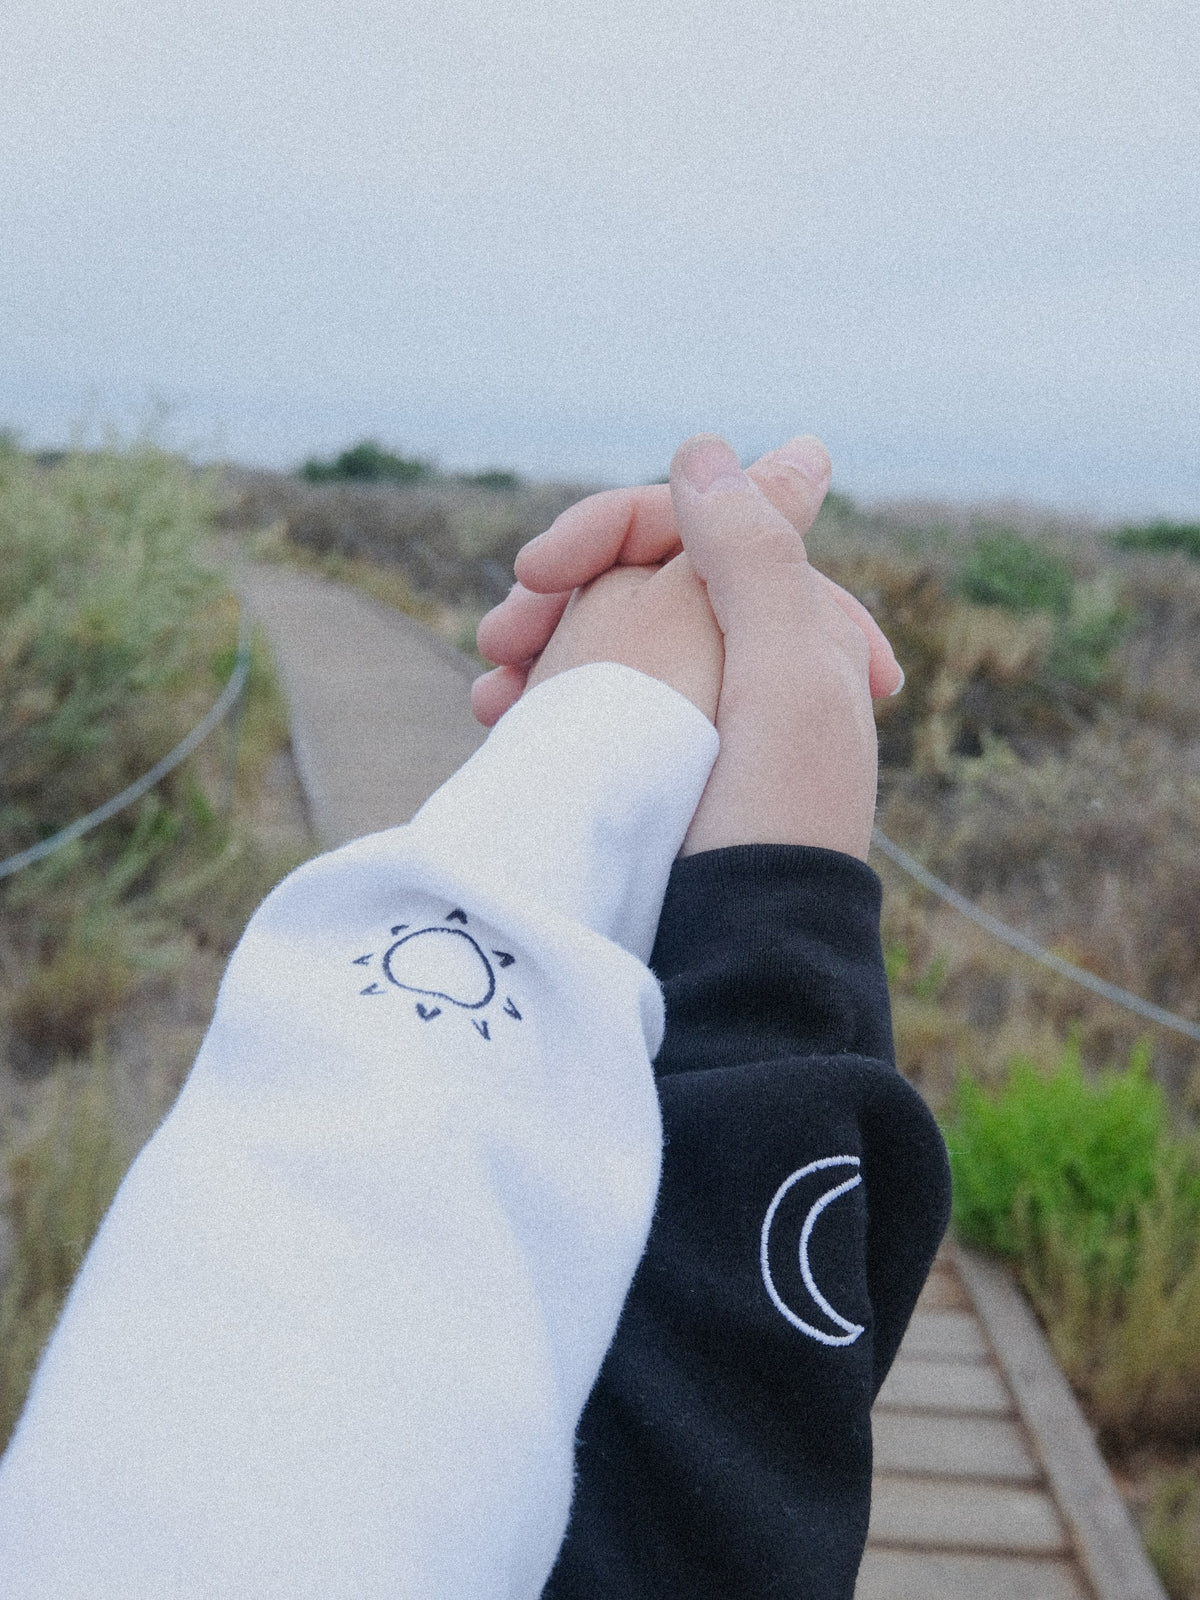 Rejoice & Do Good Christian Apparel - This is the matching crew sweatshirts based on Genesis 1. One sweater has the word Day embroidered on it while it has a little sun on the wrist and the other has Night and a moon.